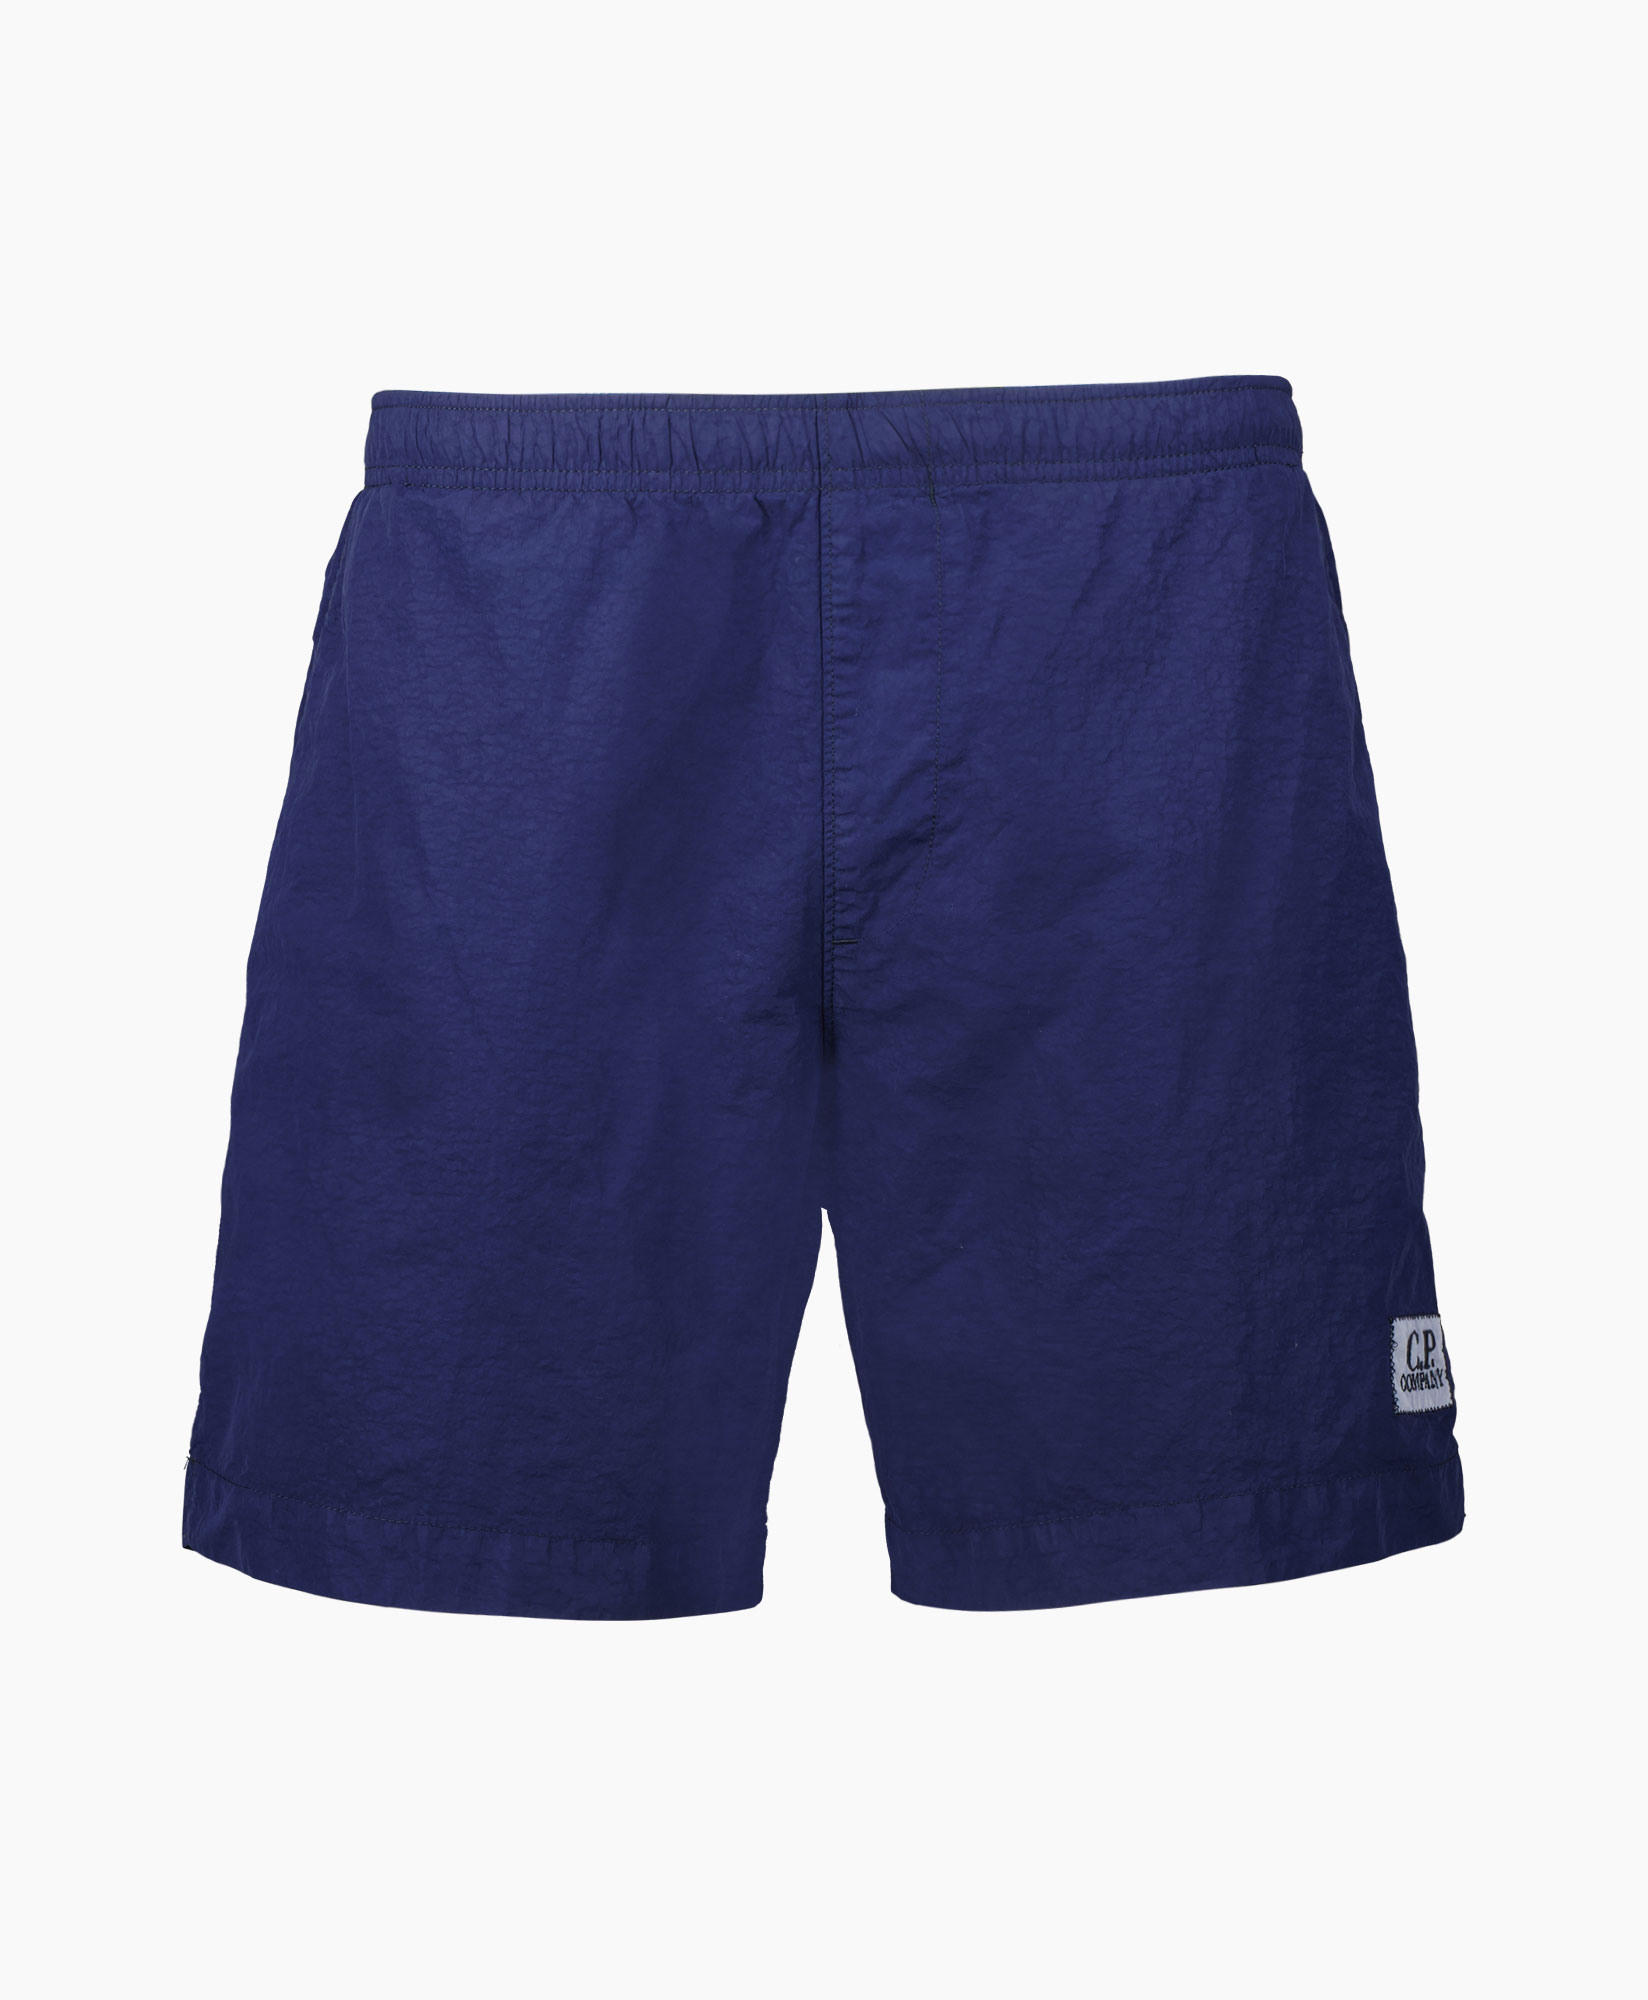 Cp Company Zwembroek 14cmbw005a-005991 Donker Blauw